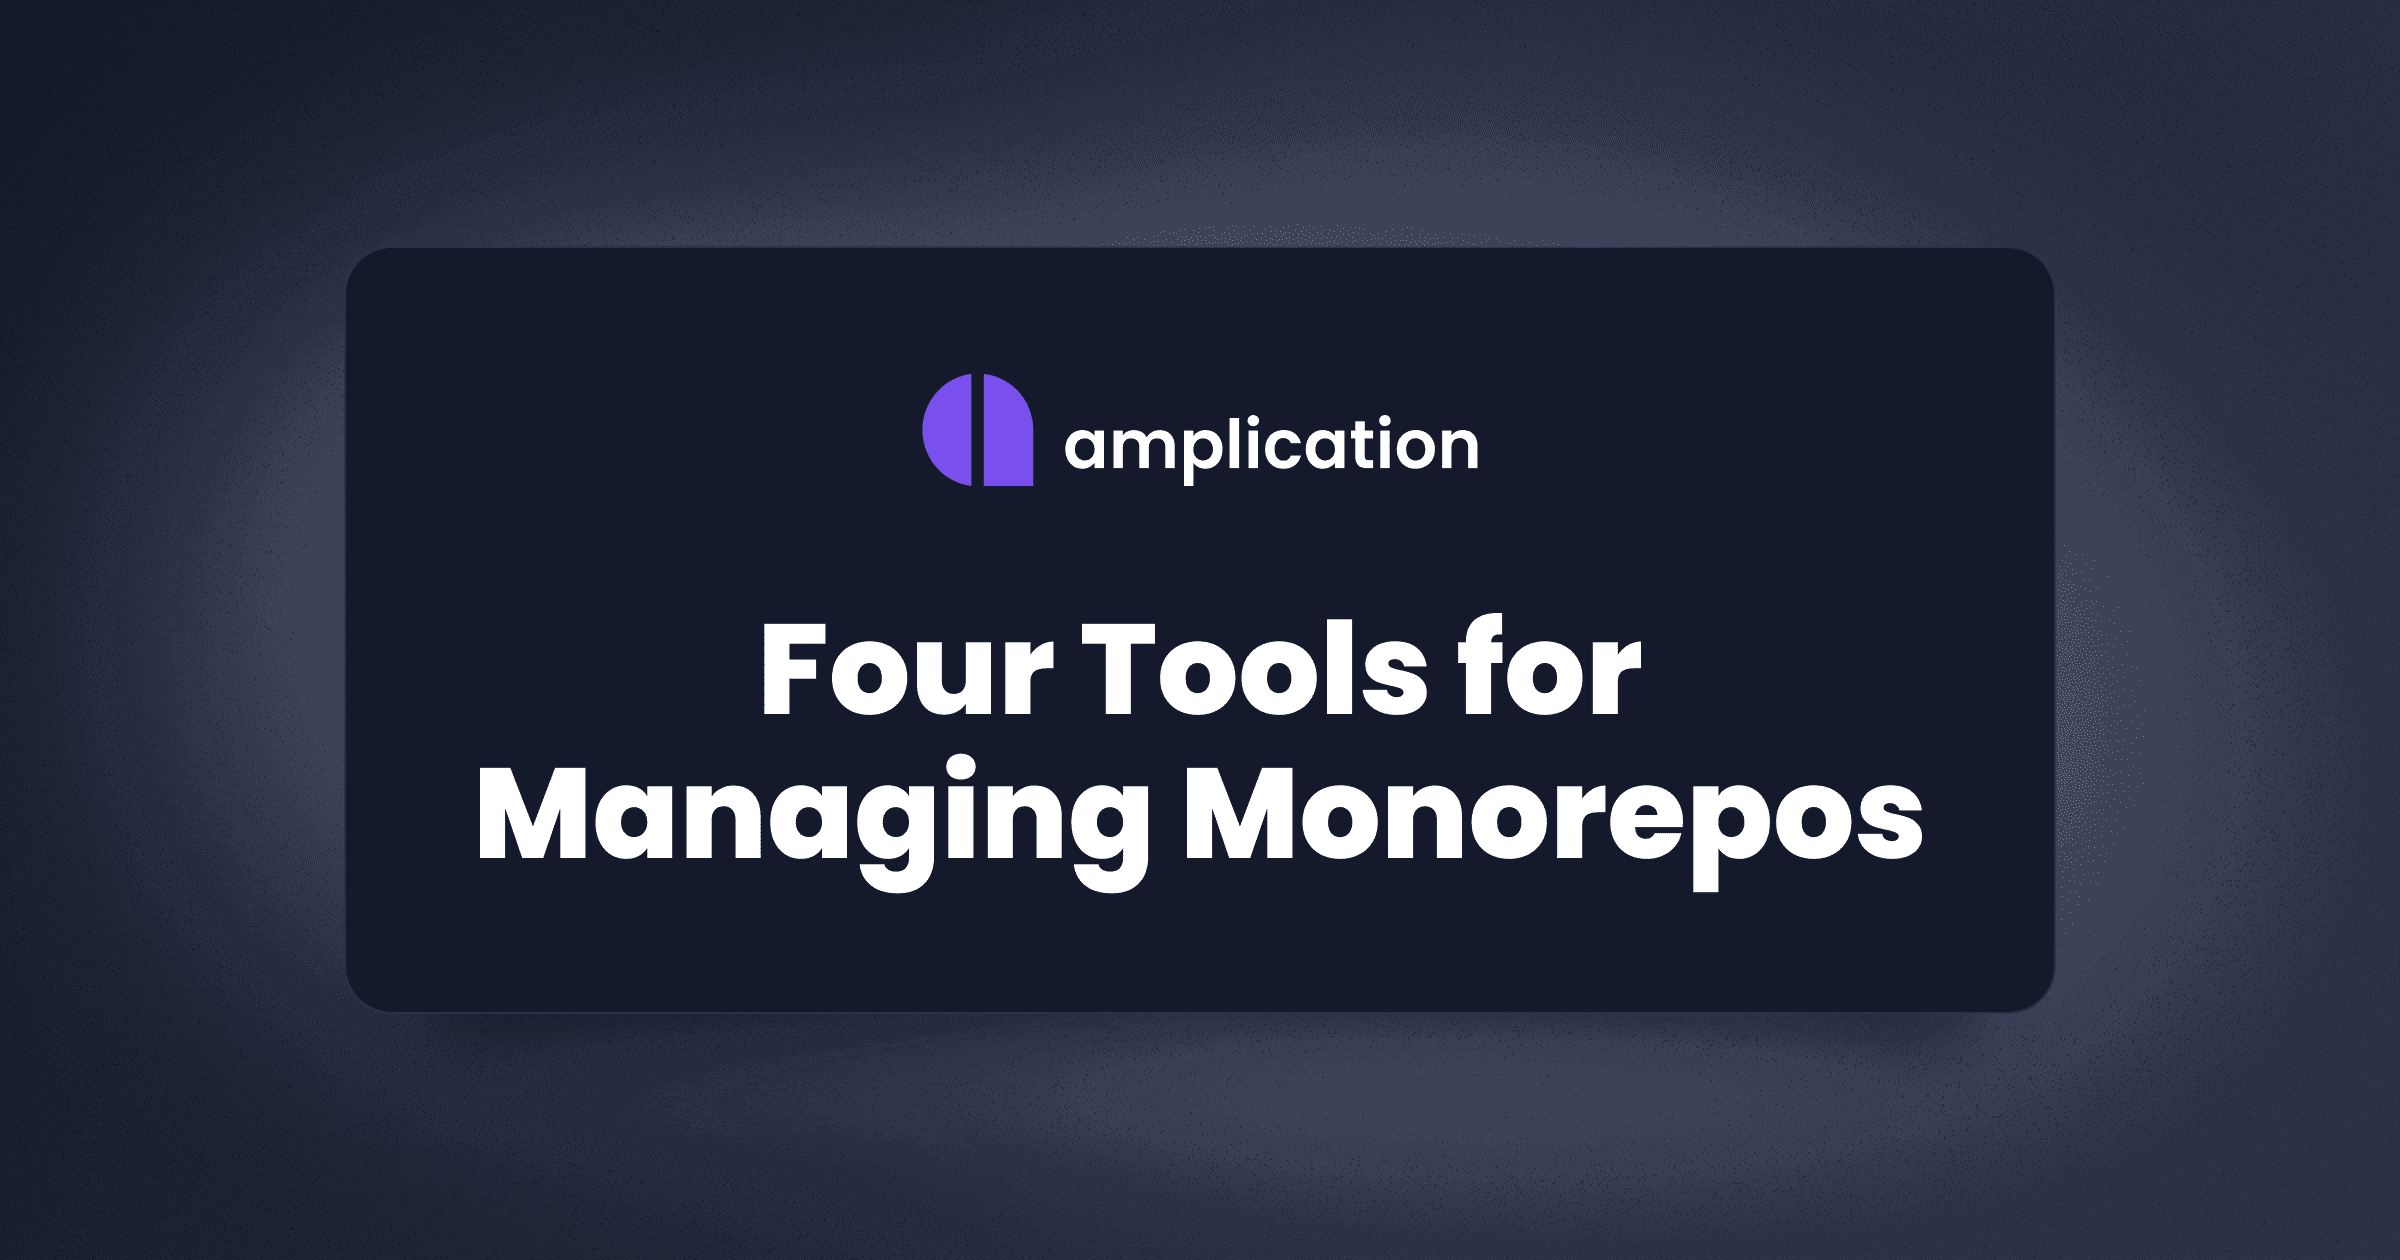 Four Tools for Managing Monorepos